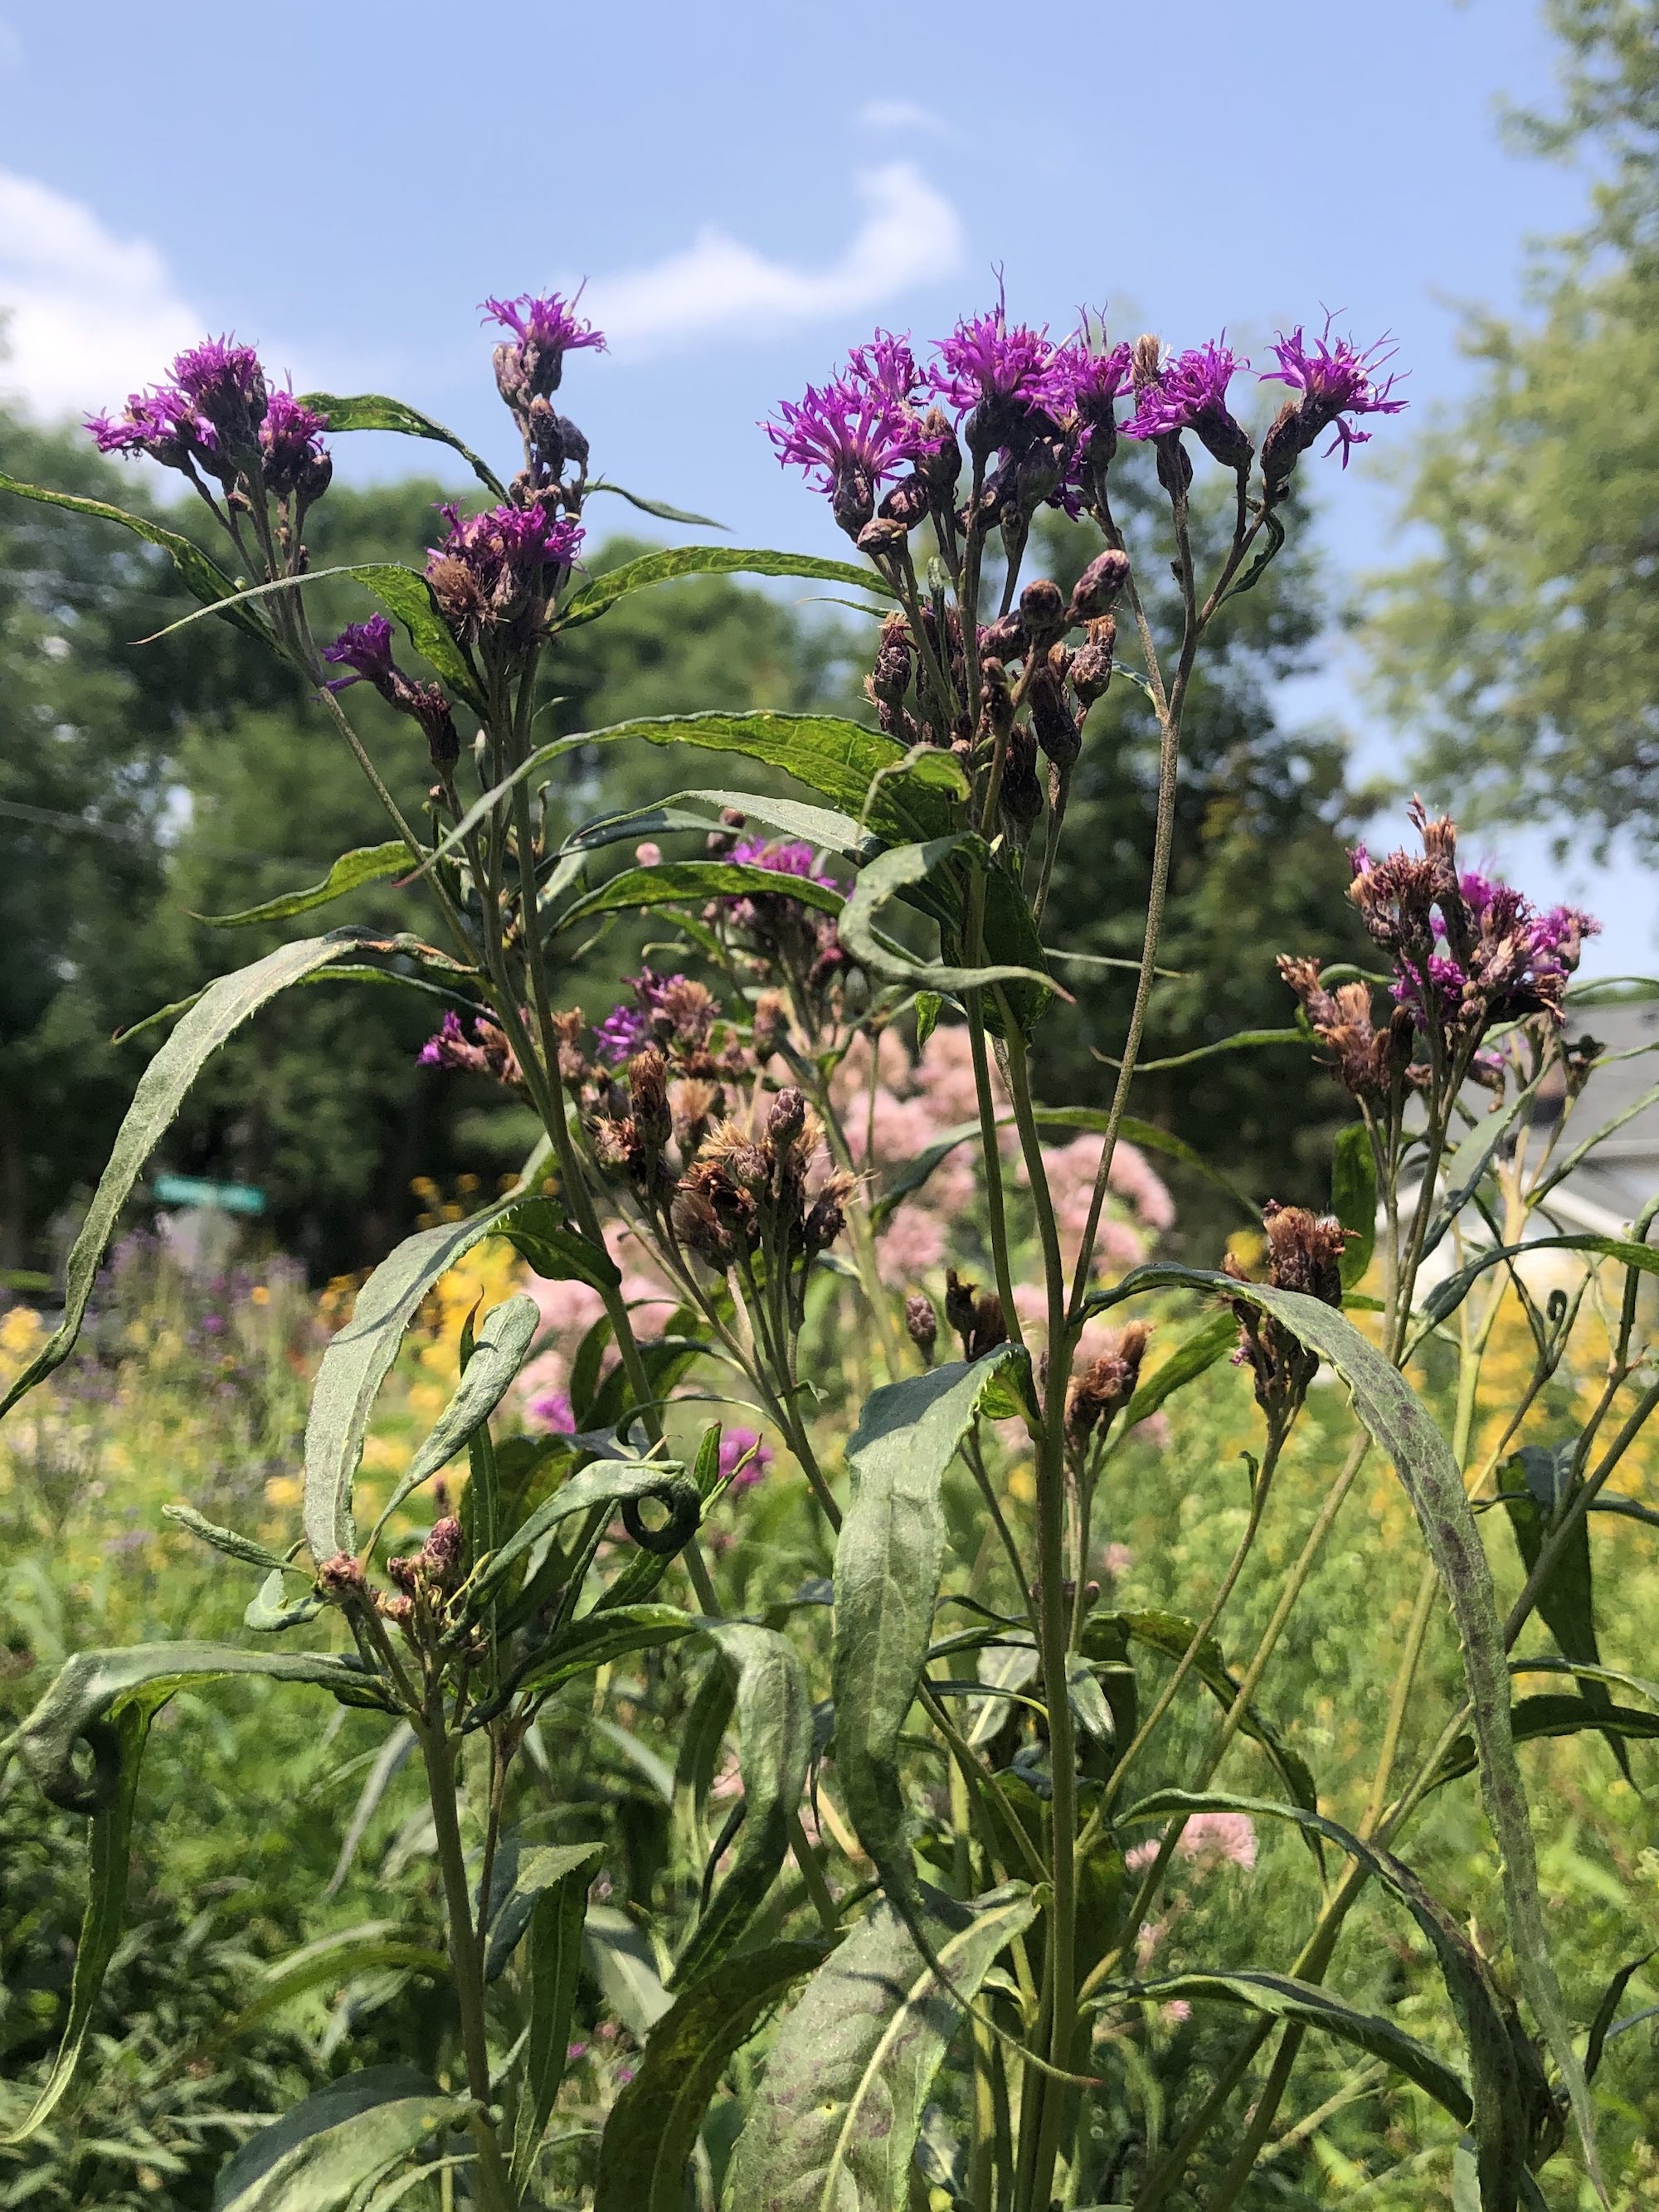 Tall Ironweed along bikepath behind Gregory Streetnear Commonwealth Avenue in Madison, Wisconsin on August3, 2021.